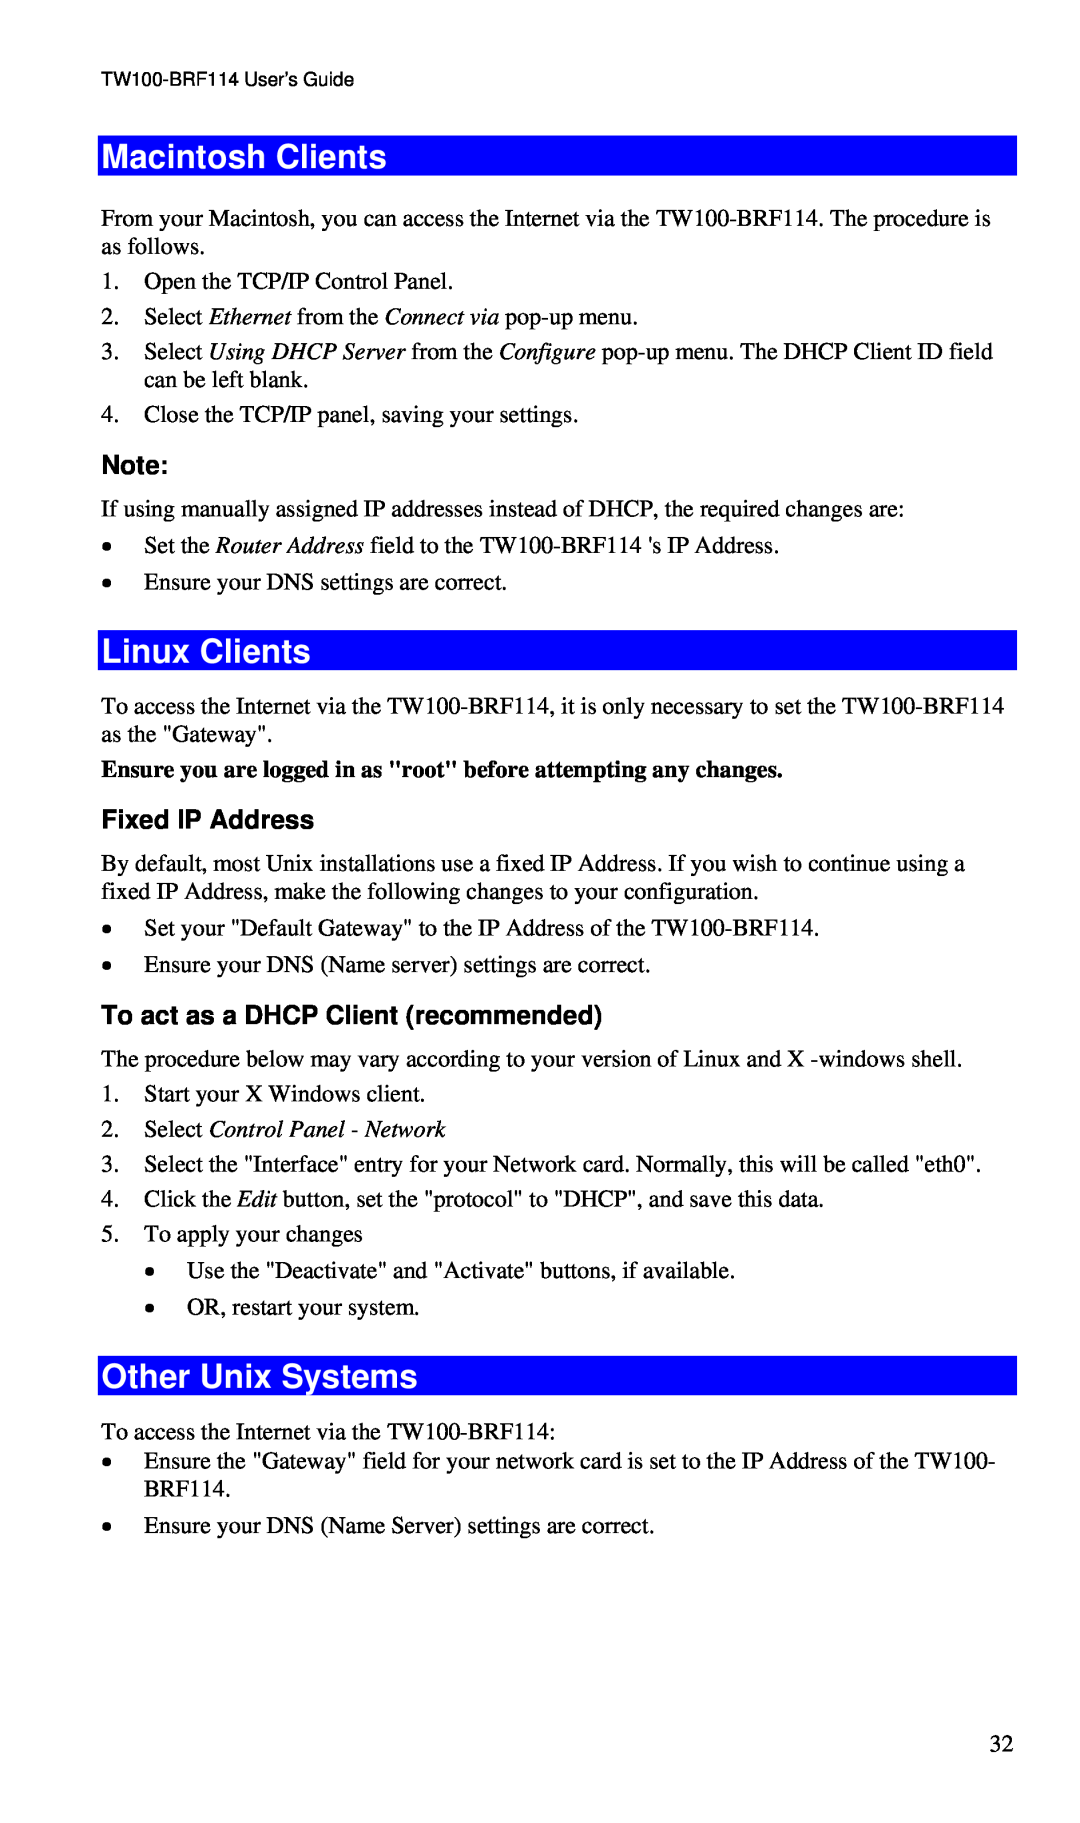 TRENDnet BRF114 manual Macintosh Clients, Linux Clients, Other Unix Systems, Select Control Panel - Network 